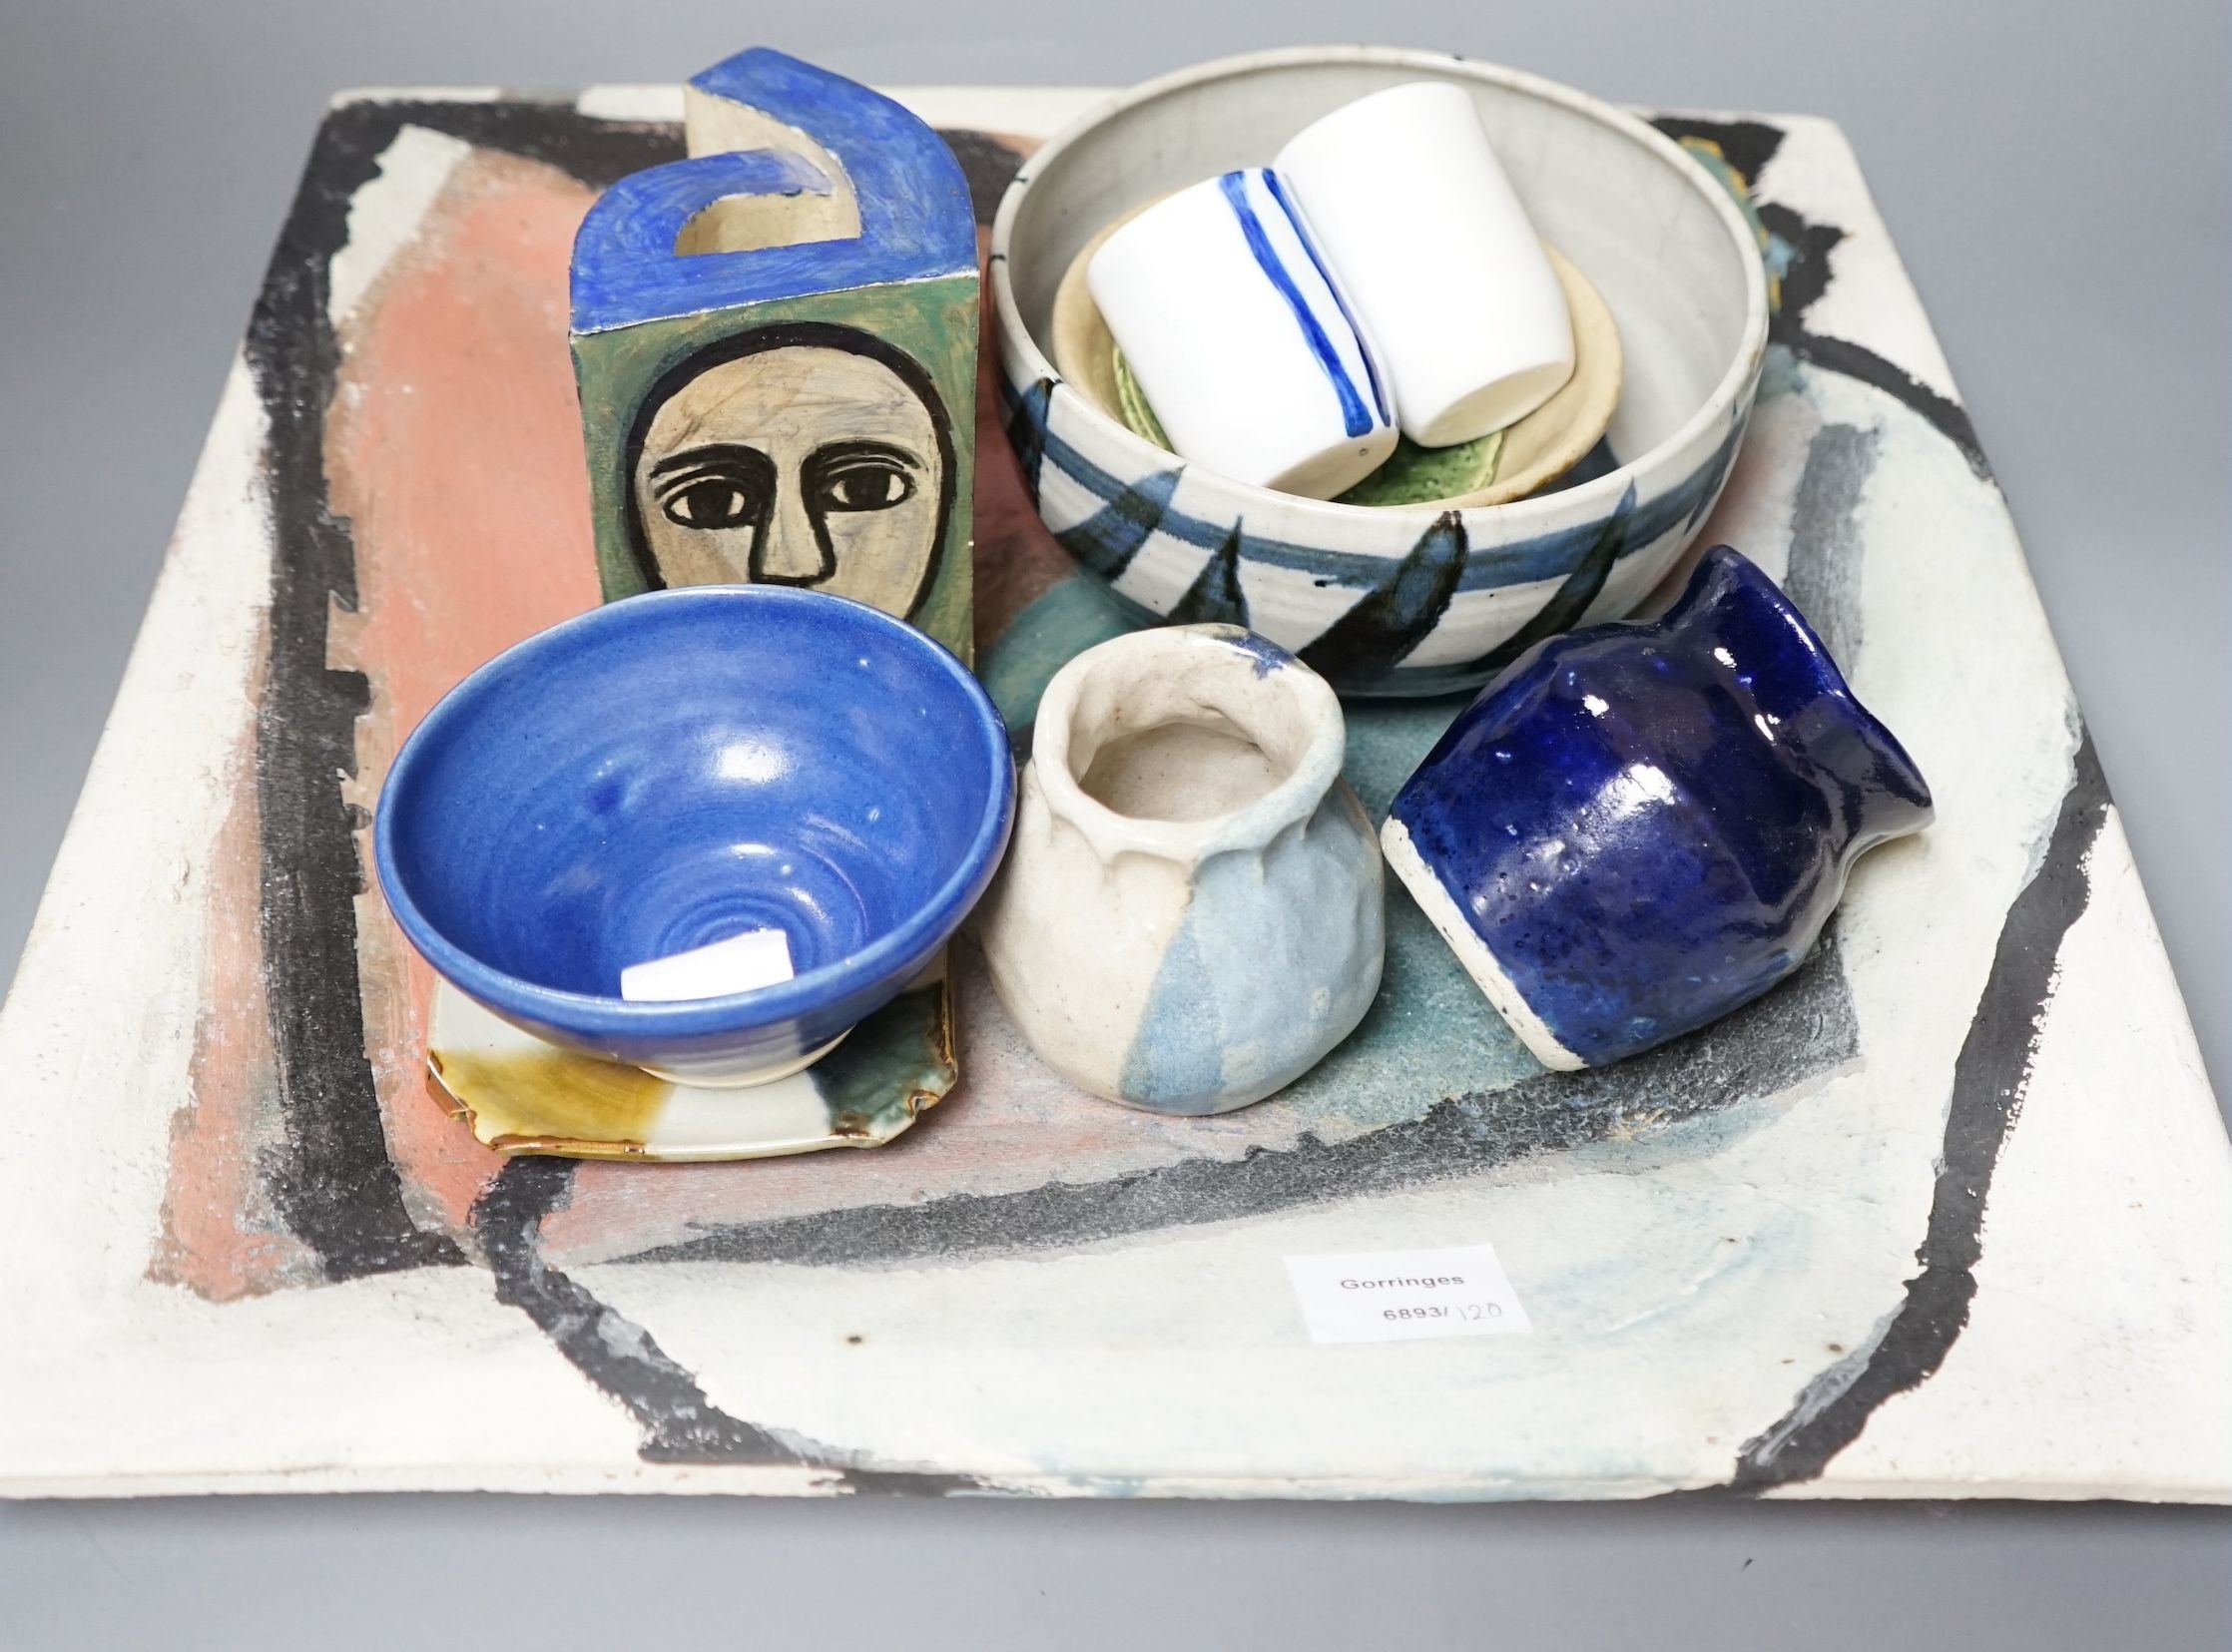 Studio pottery; a large square polychrome platter signed ‘Eastman June 87’ and a geometric vase indistinctly signed and dated 91, together with other various studio pottery wares